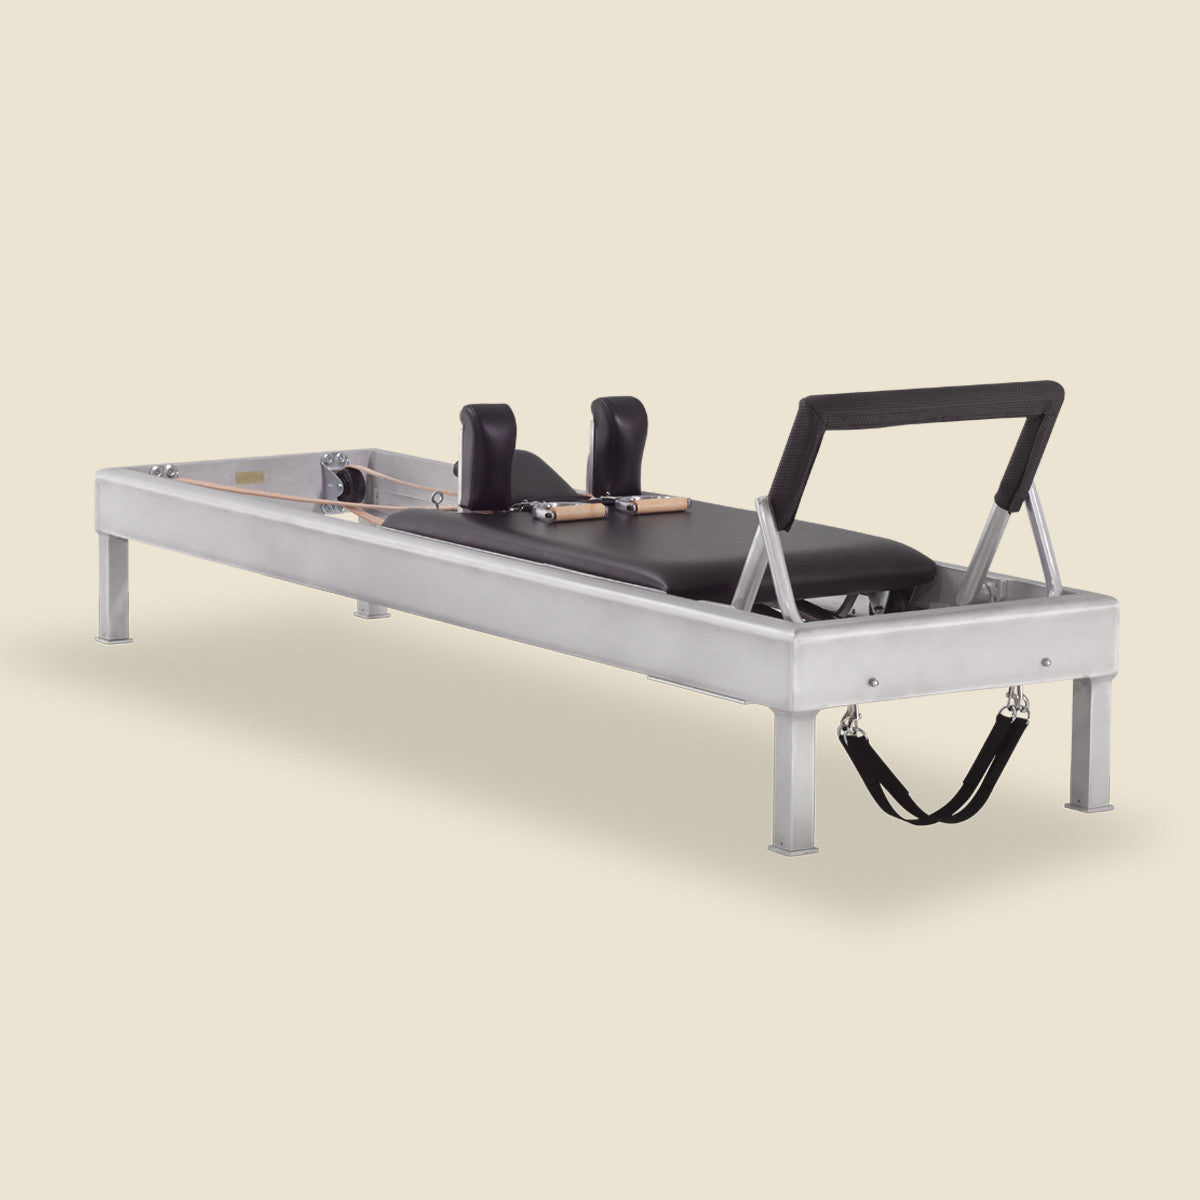 Instant Full Cadillac Conversion with 86 Universal Reformer